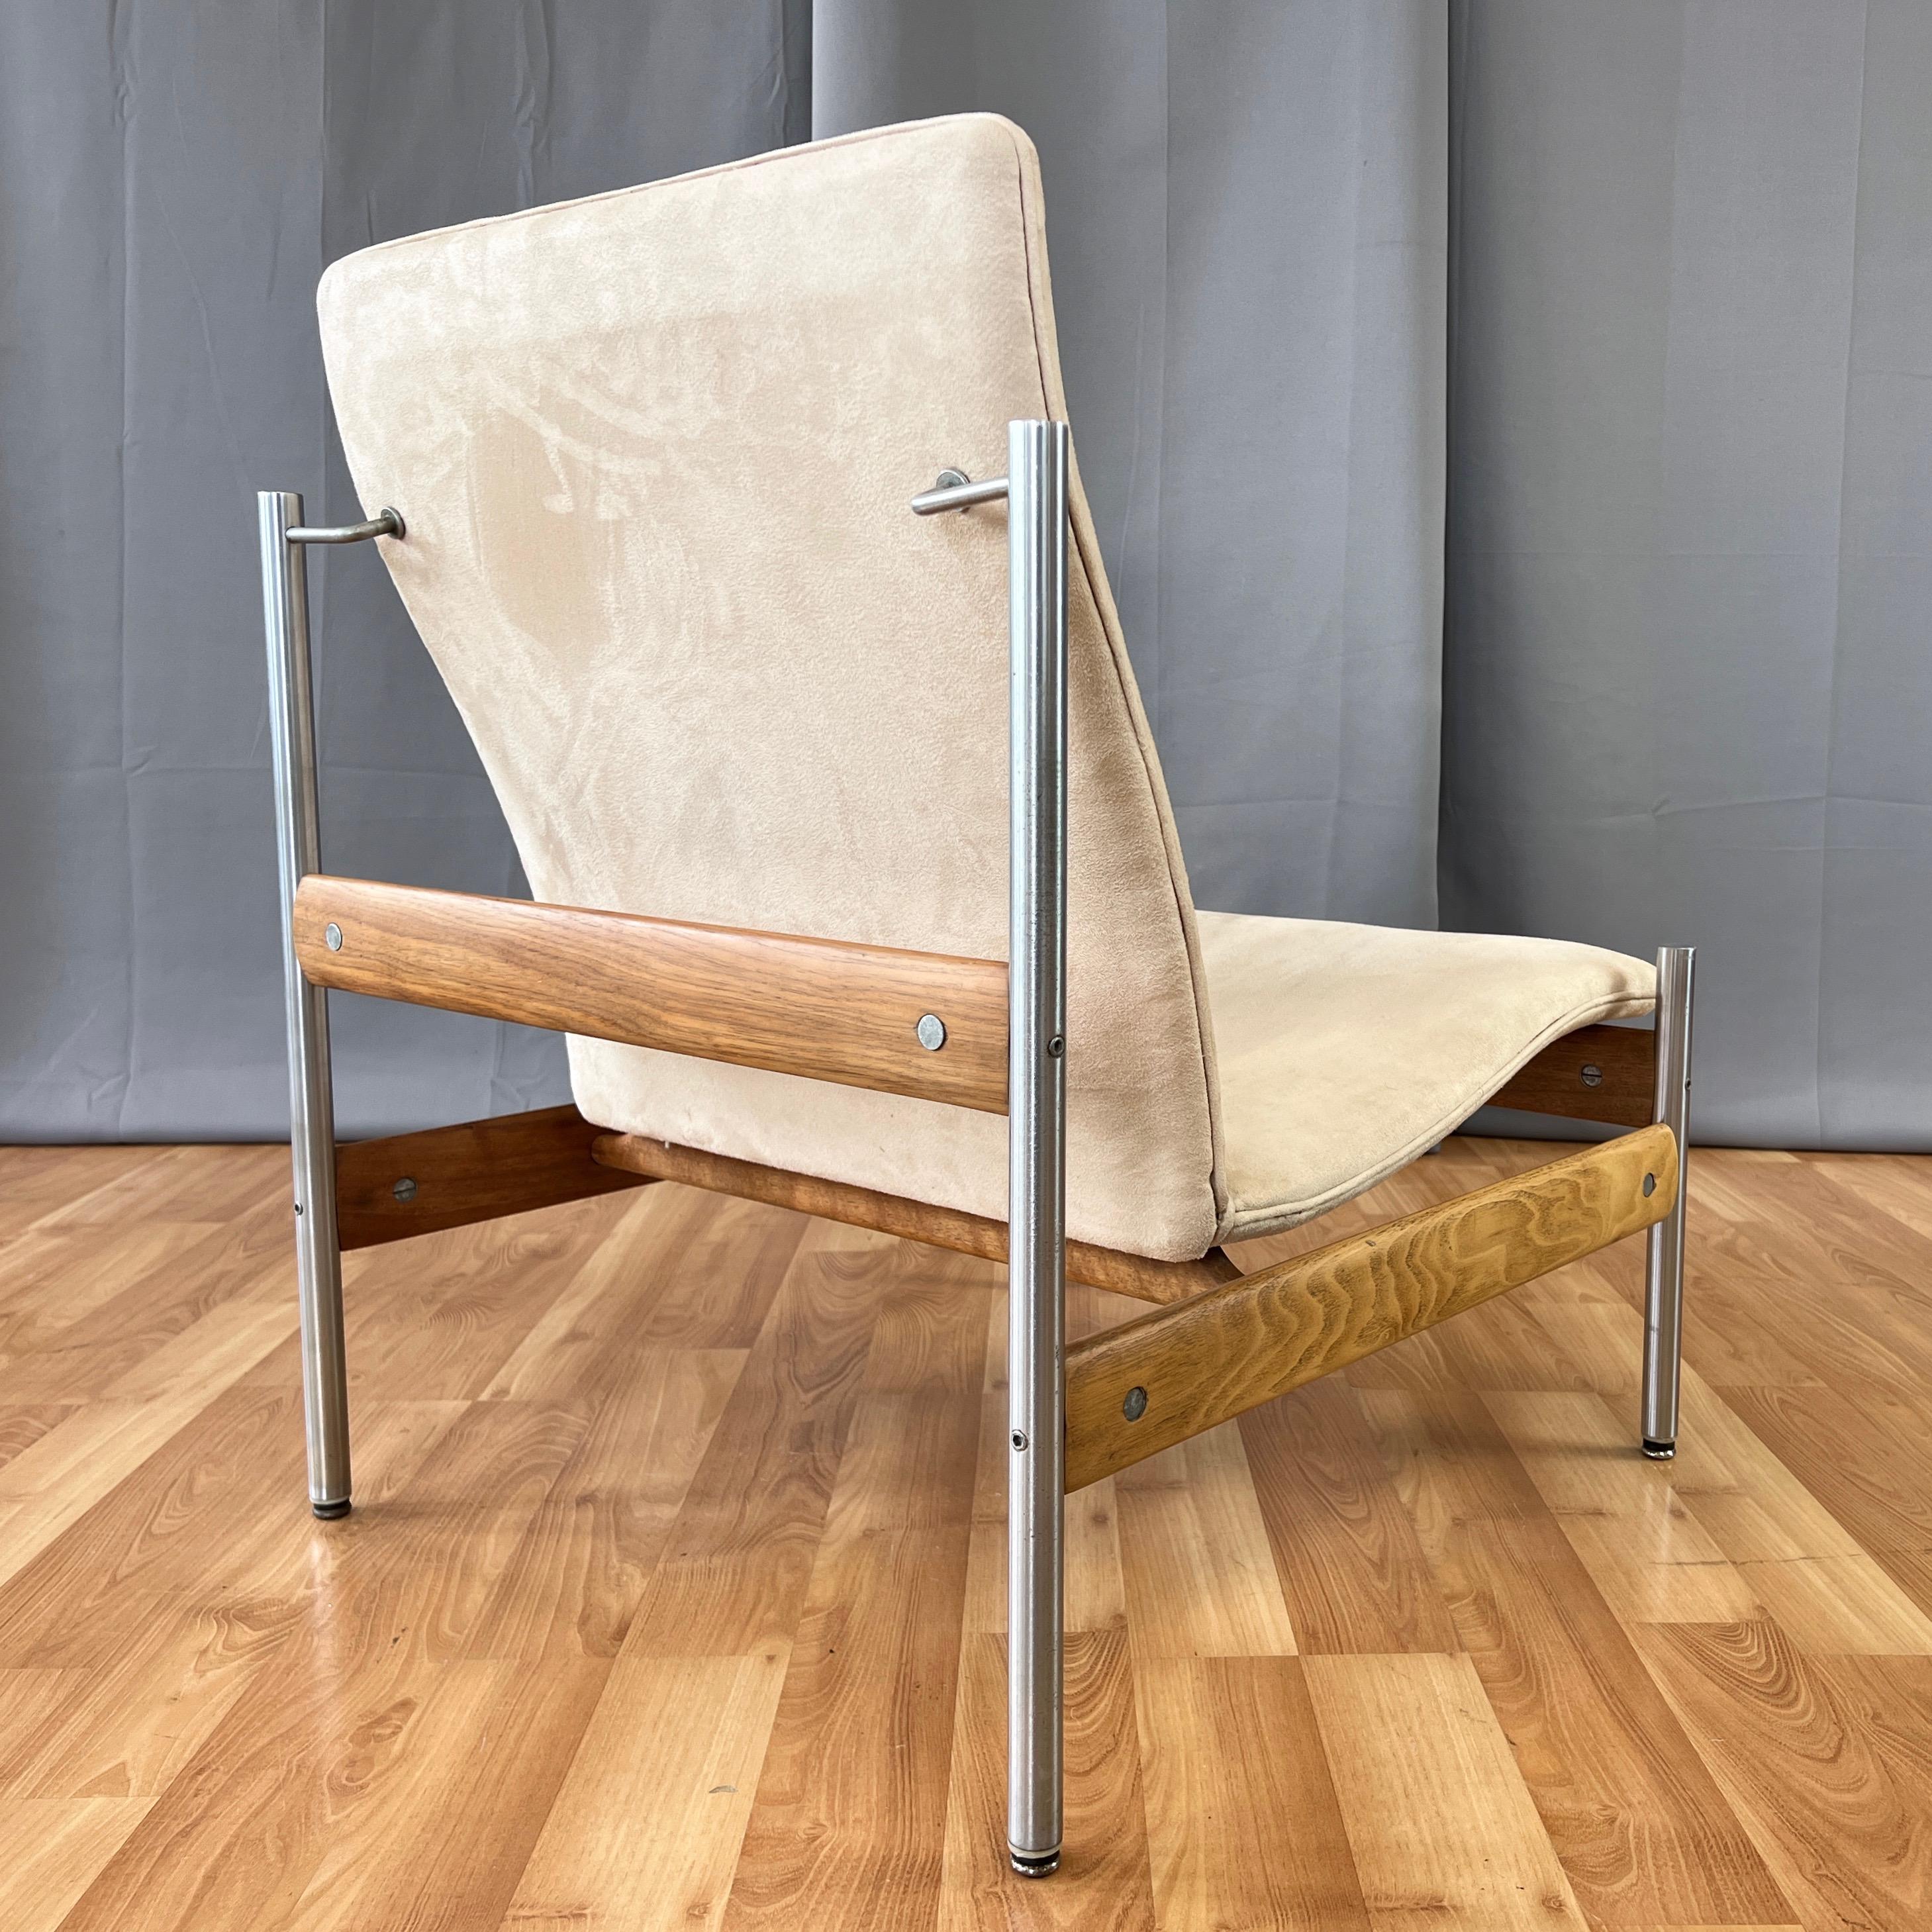 Plated Sven Ivar Dysthe for Dokka Møbler Teak and Nickel Armless Lounge Chair, 1960s For Sale